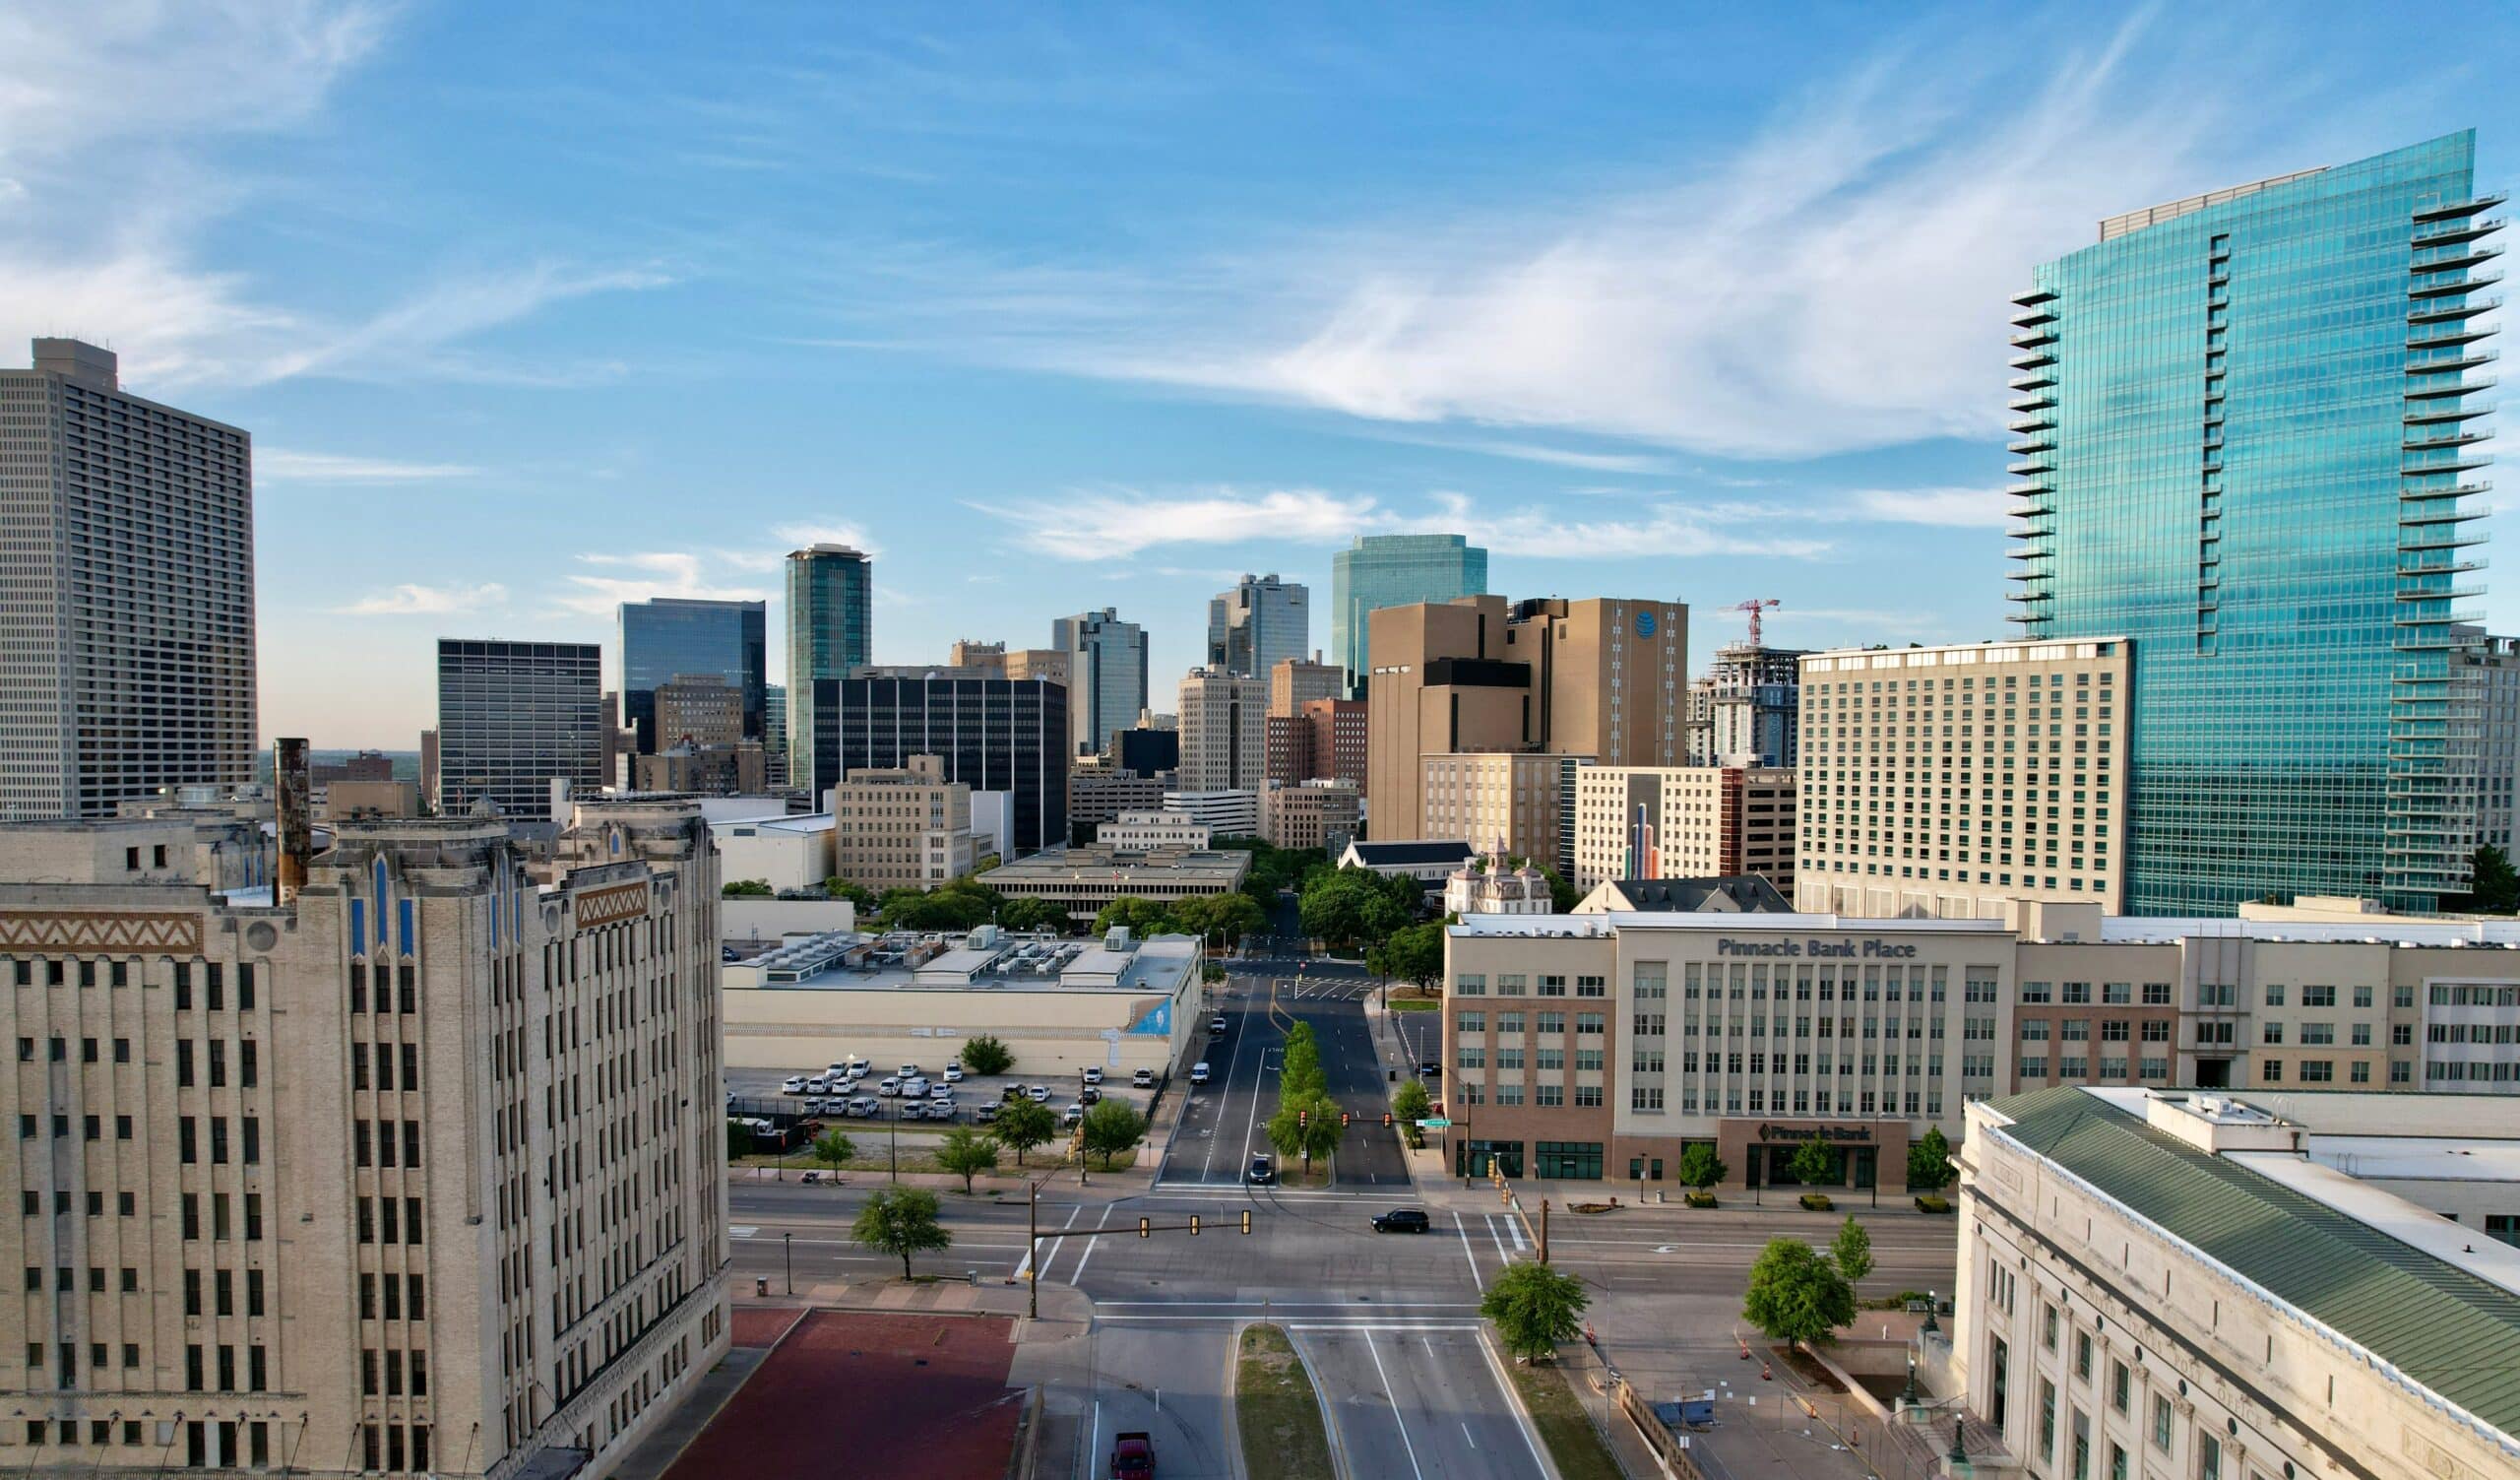 A stunning aerial view of Downtown Fort Worth, Texas Skyline